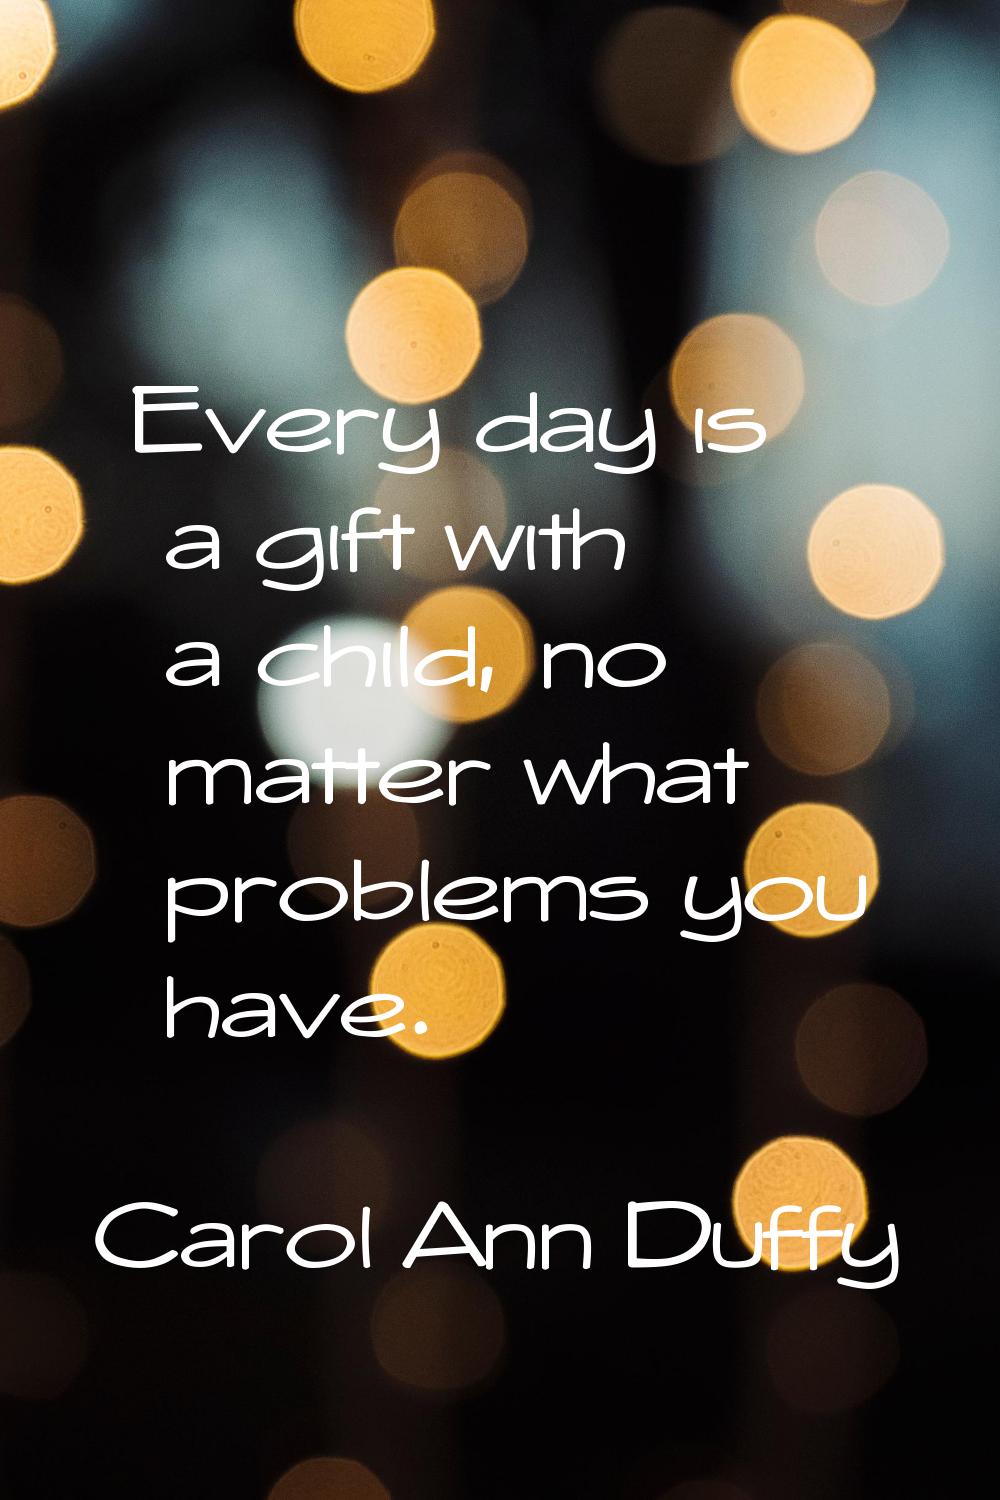 Every day is a gift with a child, no matter what problems you have.